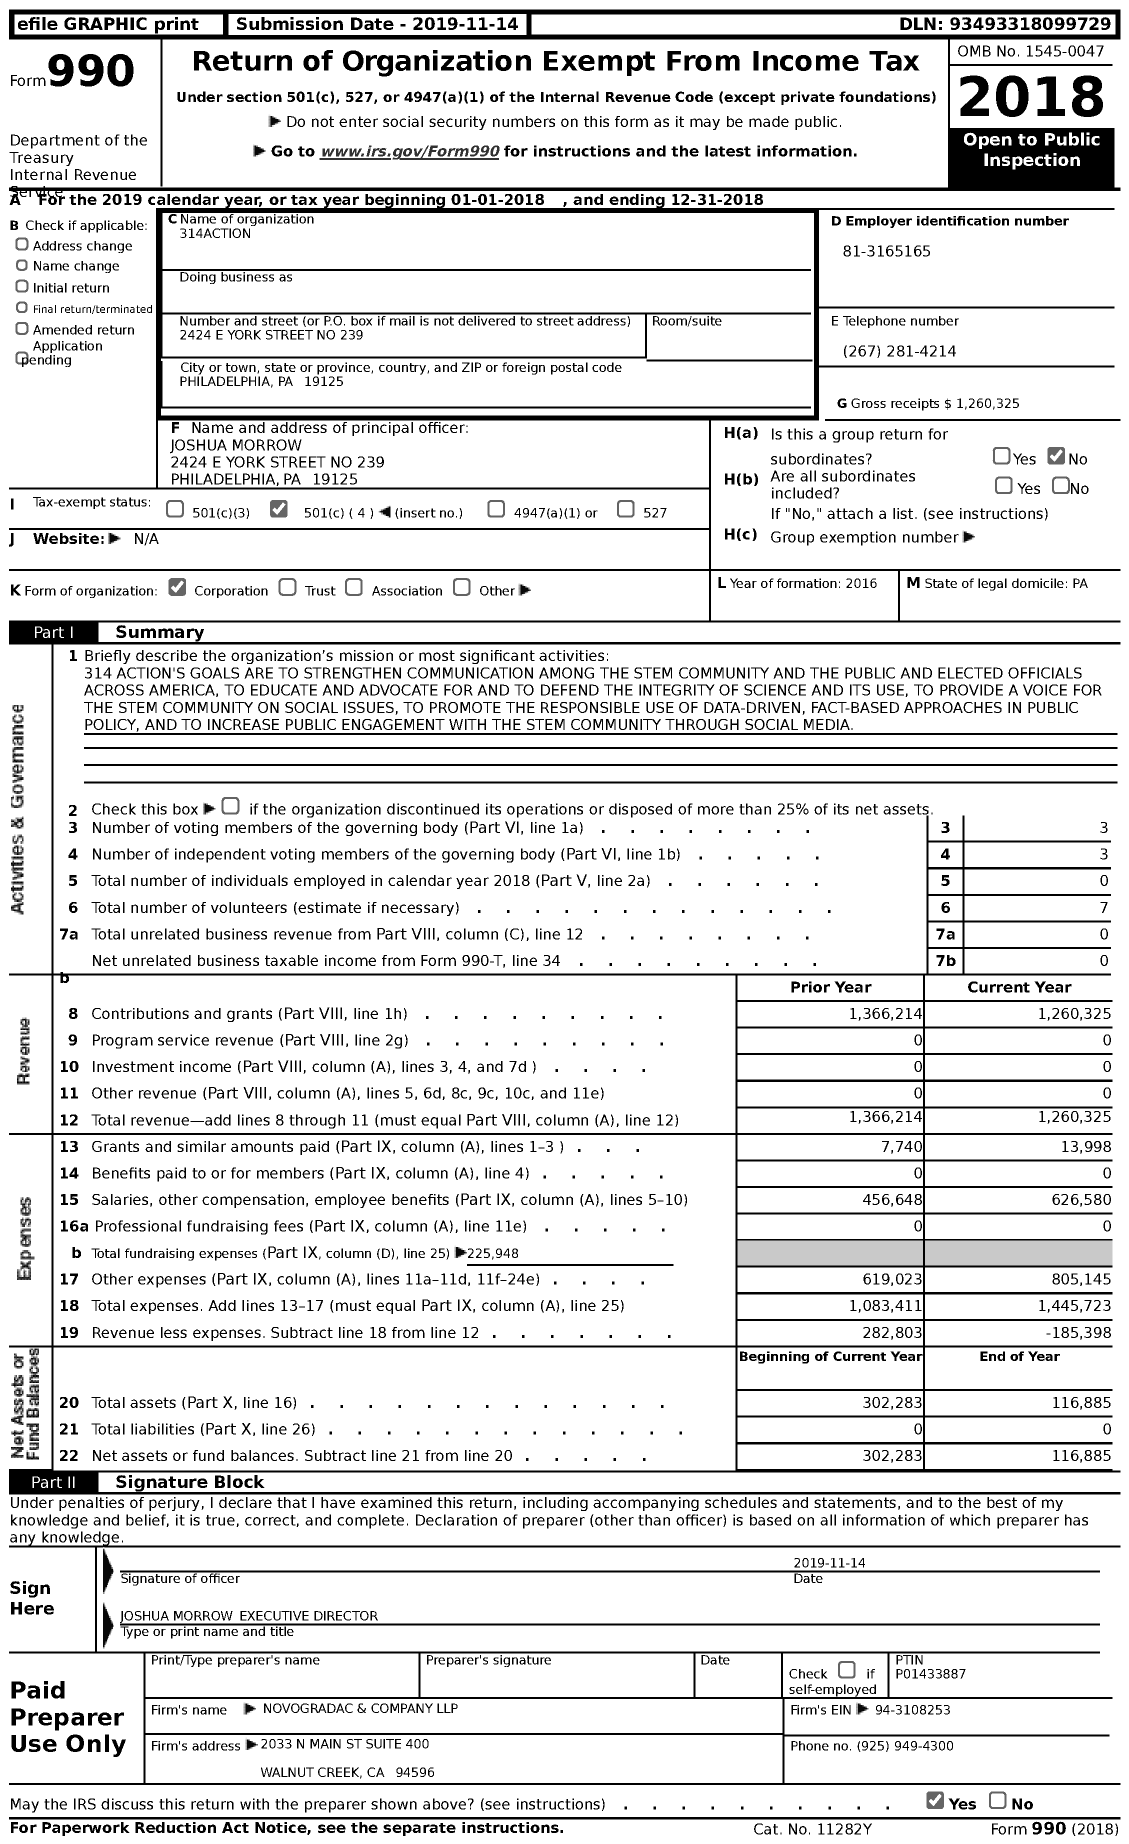 Image of first page of 2018 Form 990 for 314action